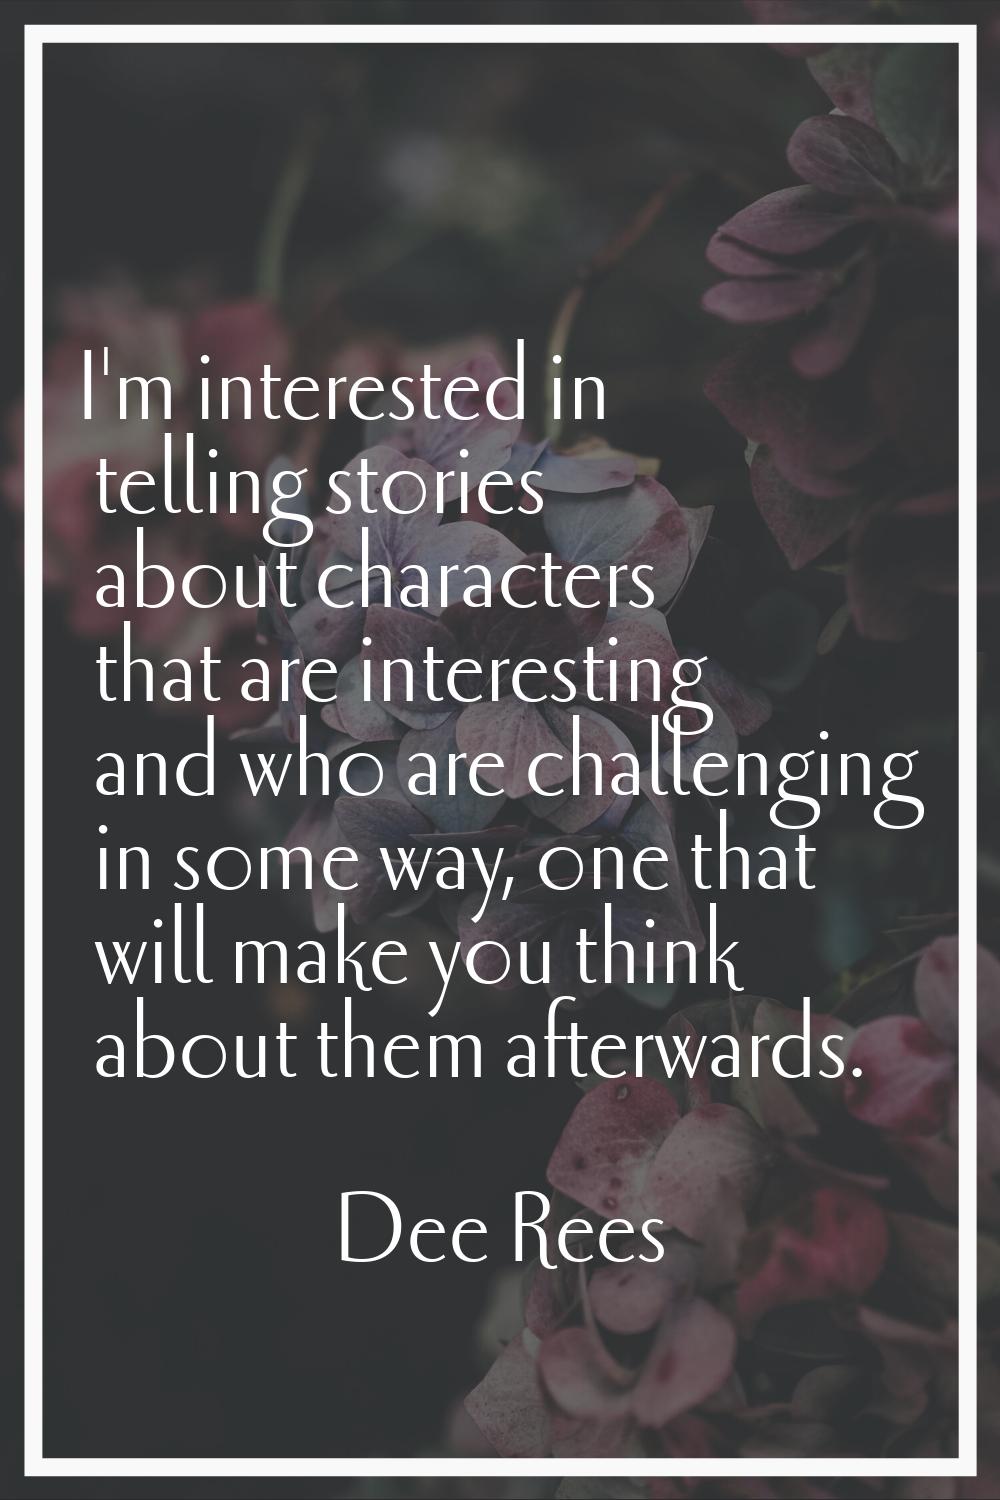 I'm interested in telling stories about characters that are interesting and who are challenging in 